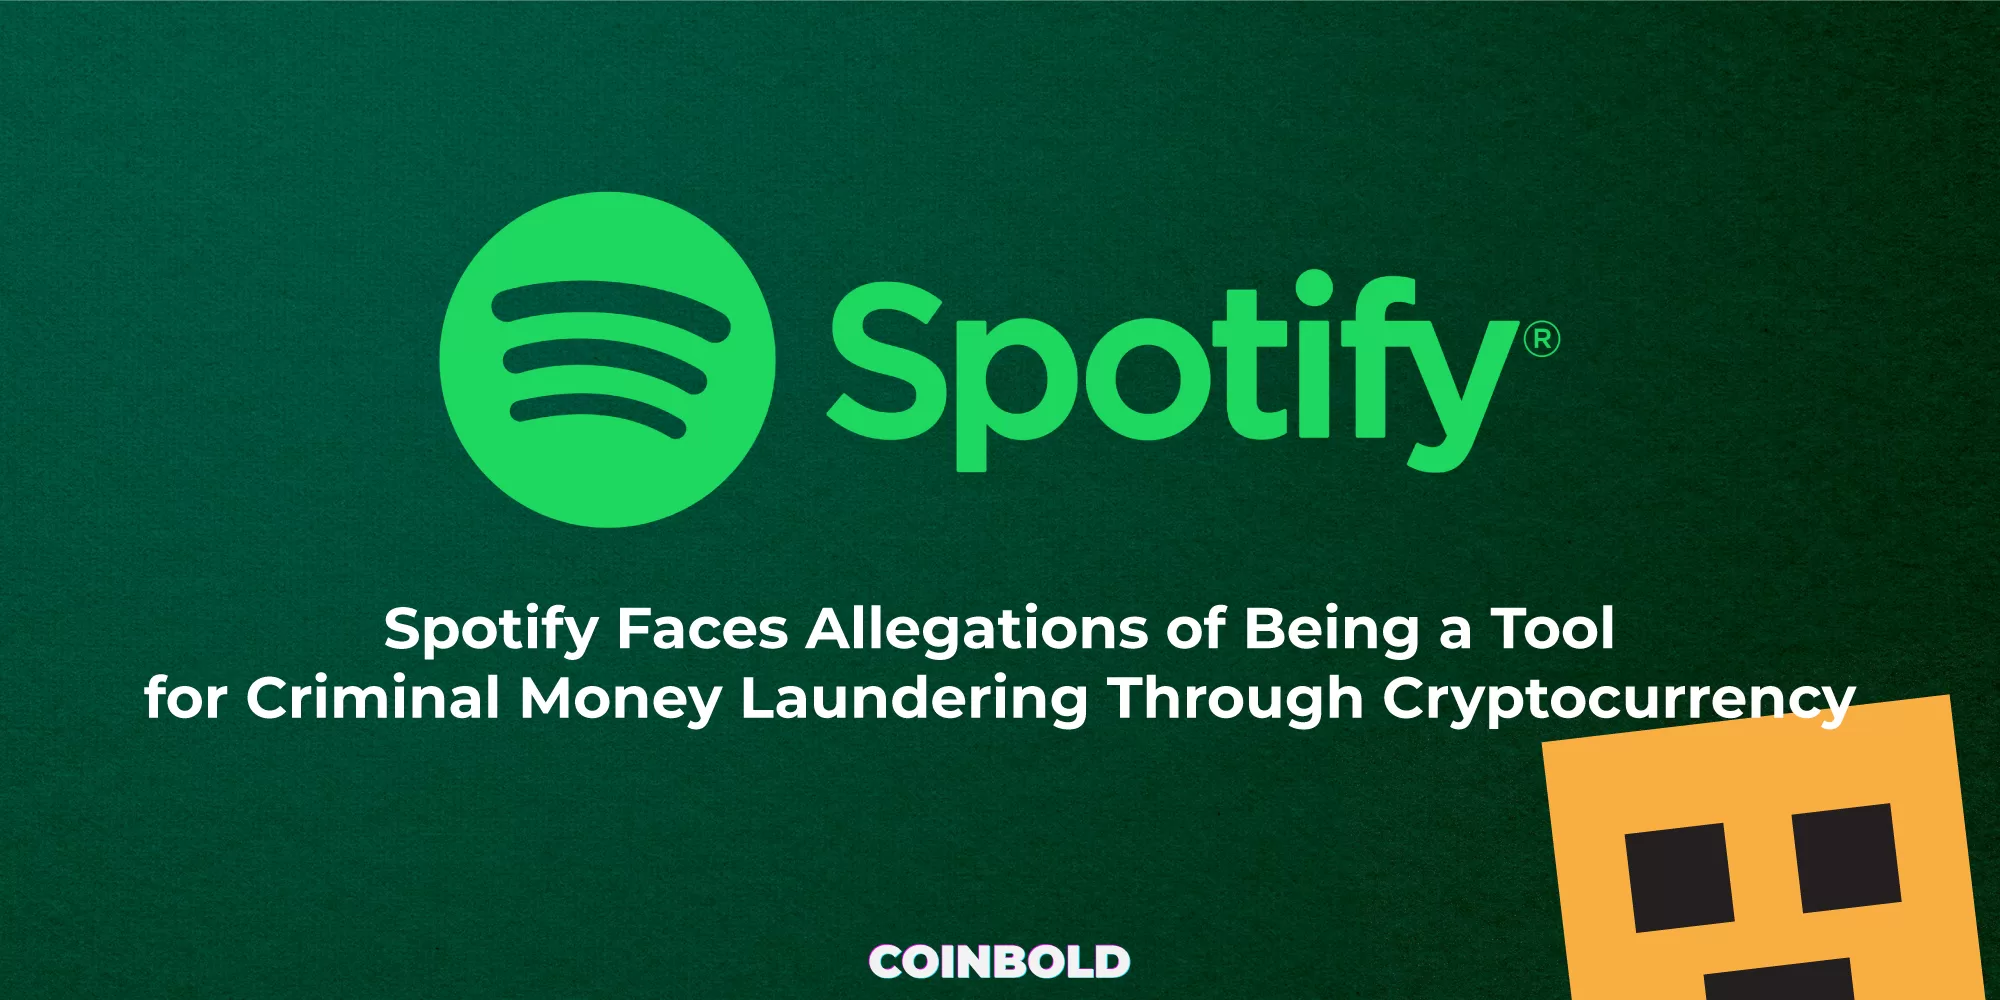 Spotify Faces Allegations of Being a Tool for Criminal Money Laundering Through Cryptocurrency